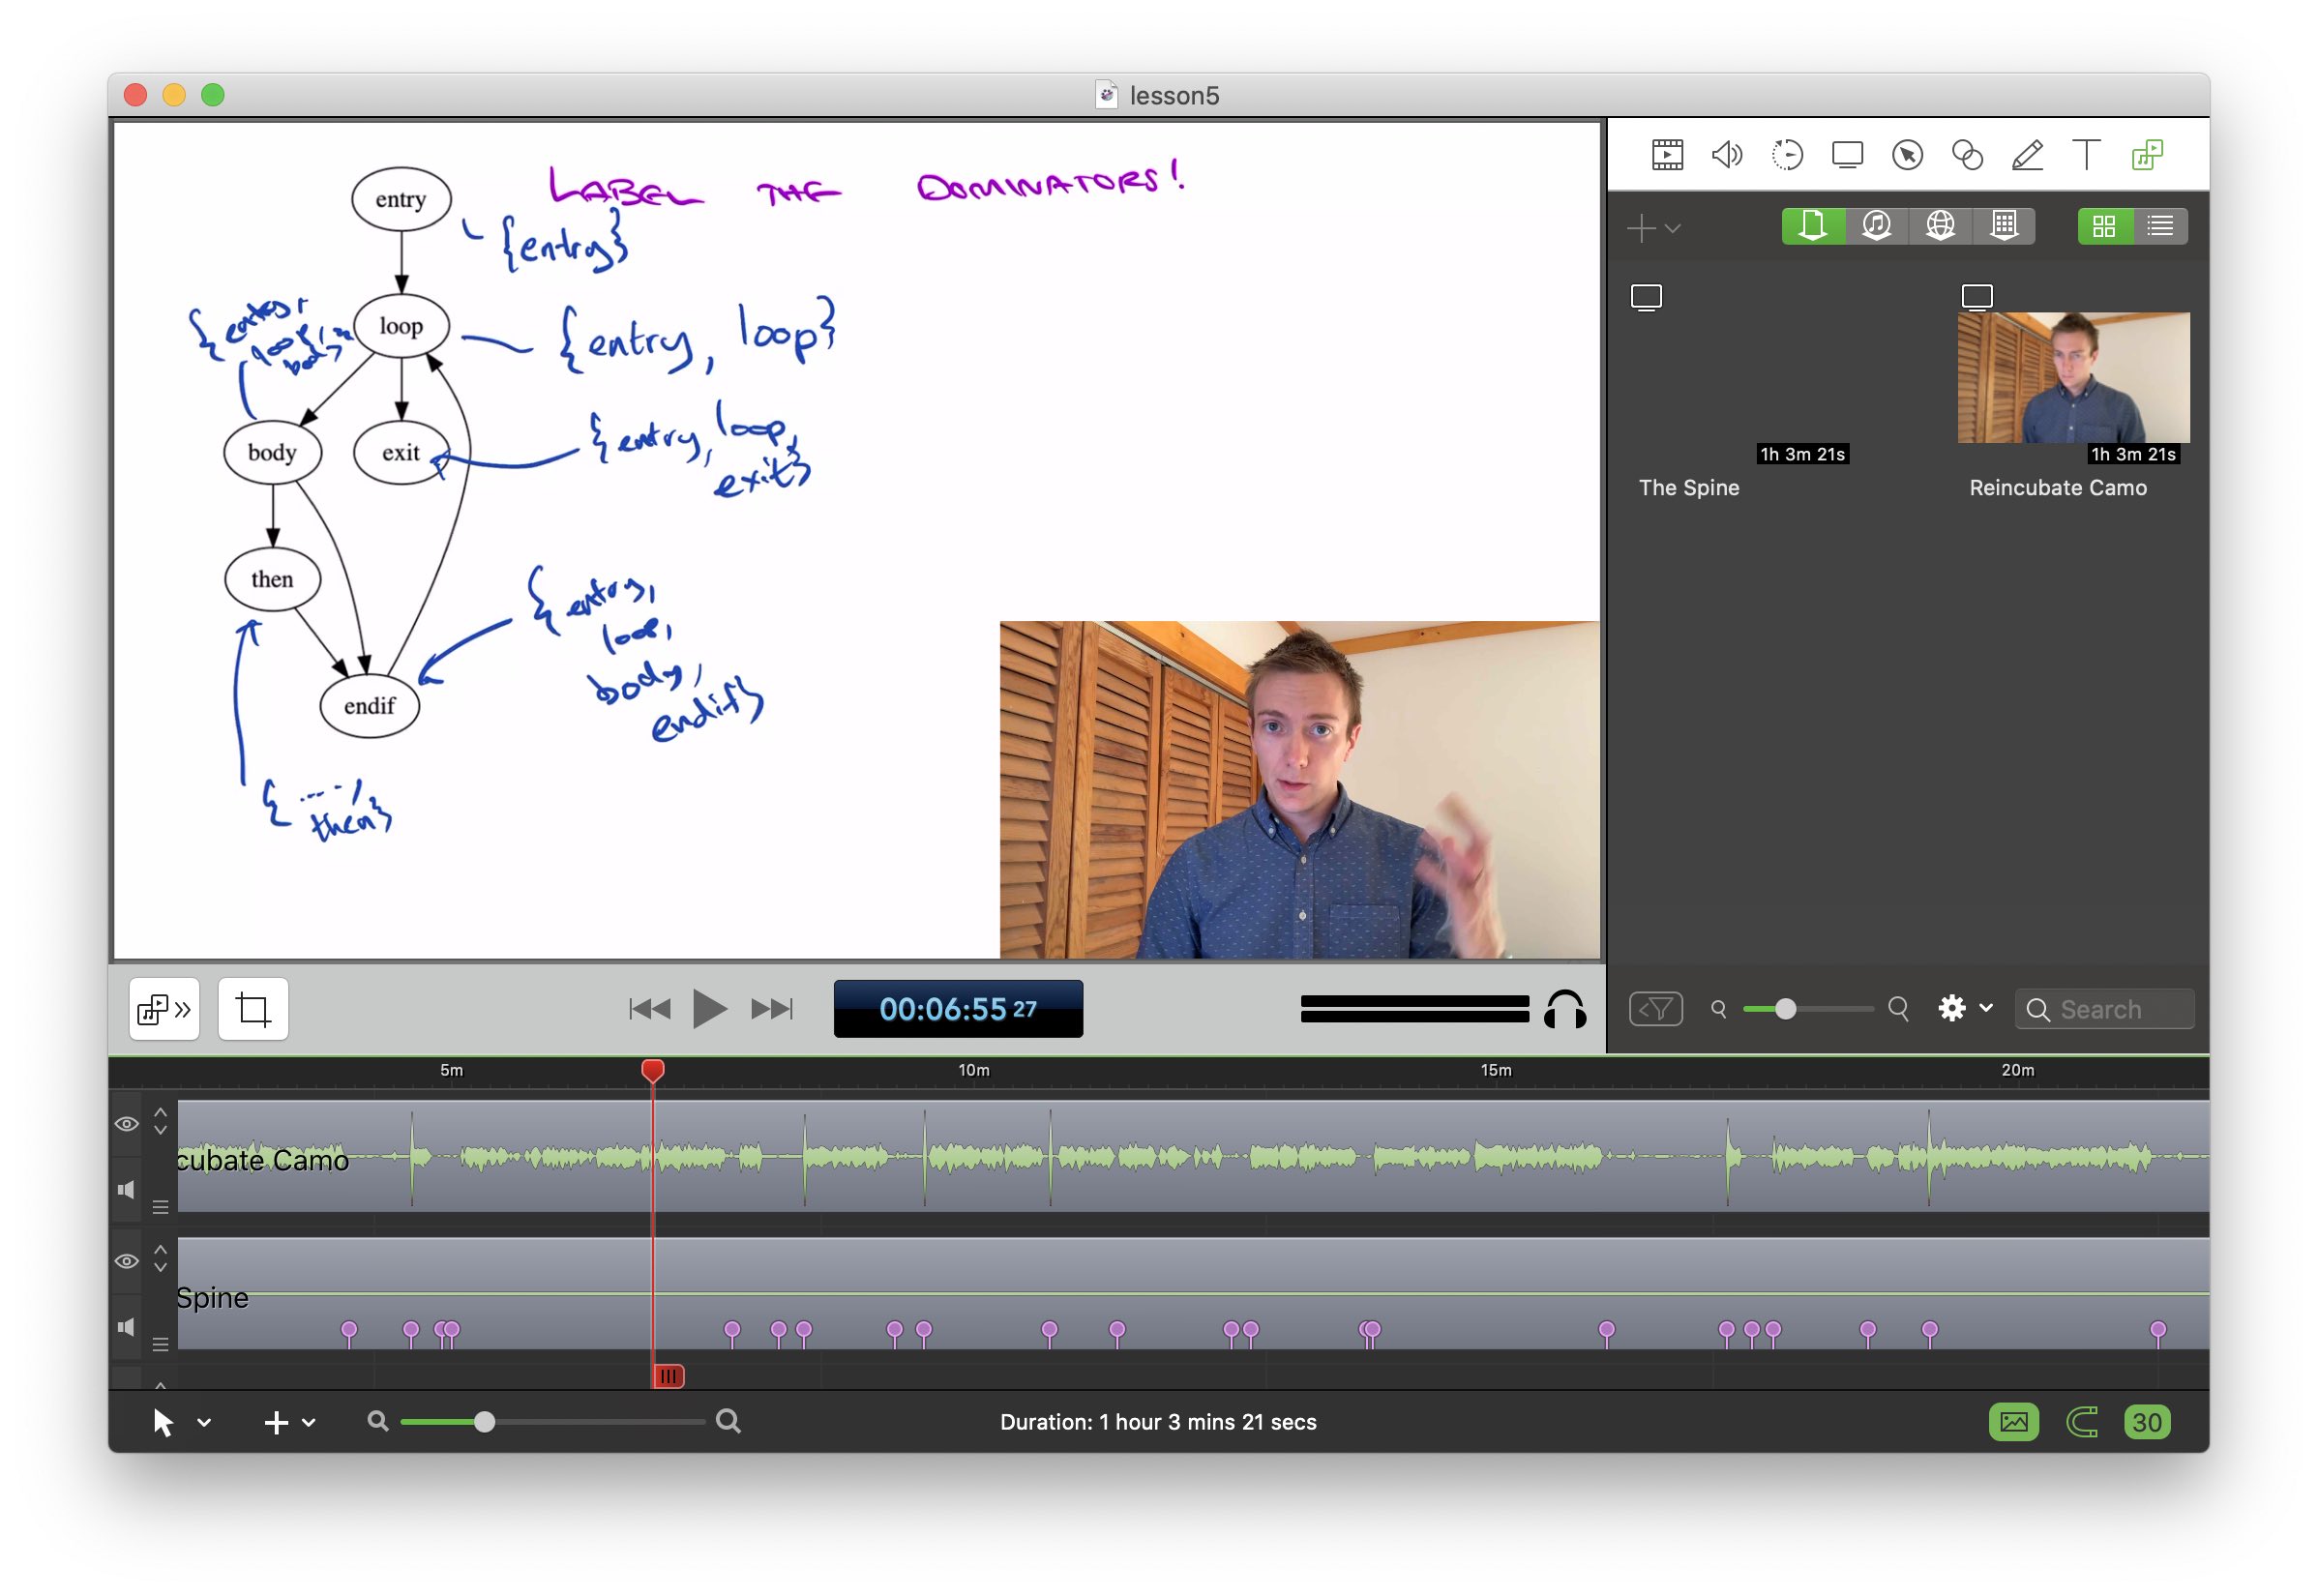 screenshot of editing a lesson video in ScreenFlow 9